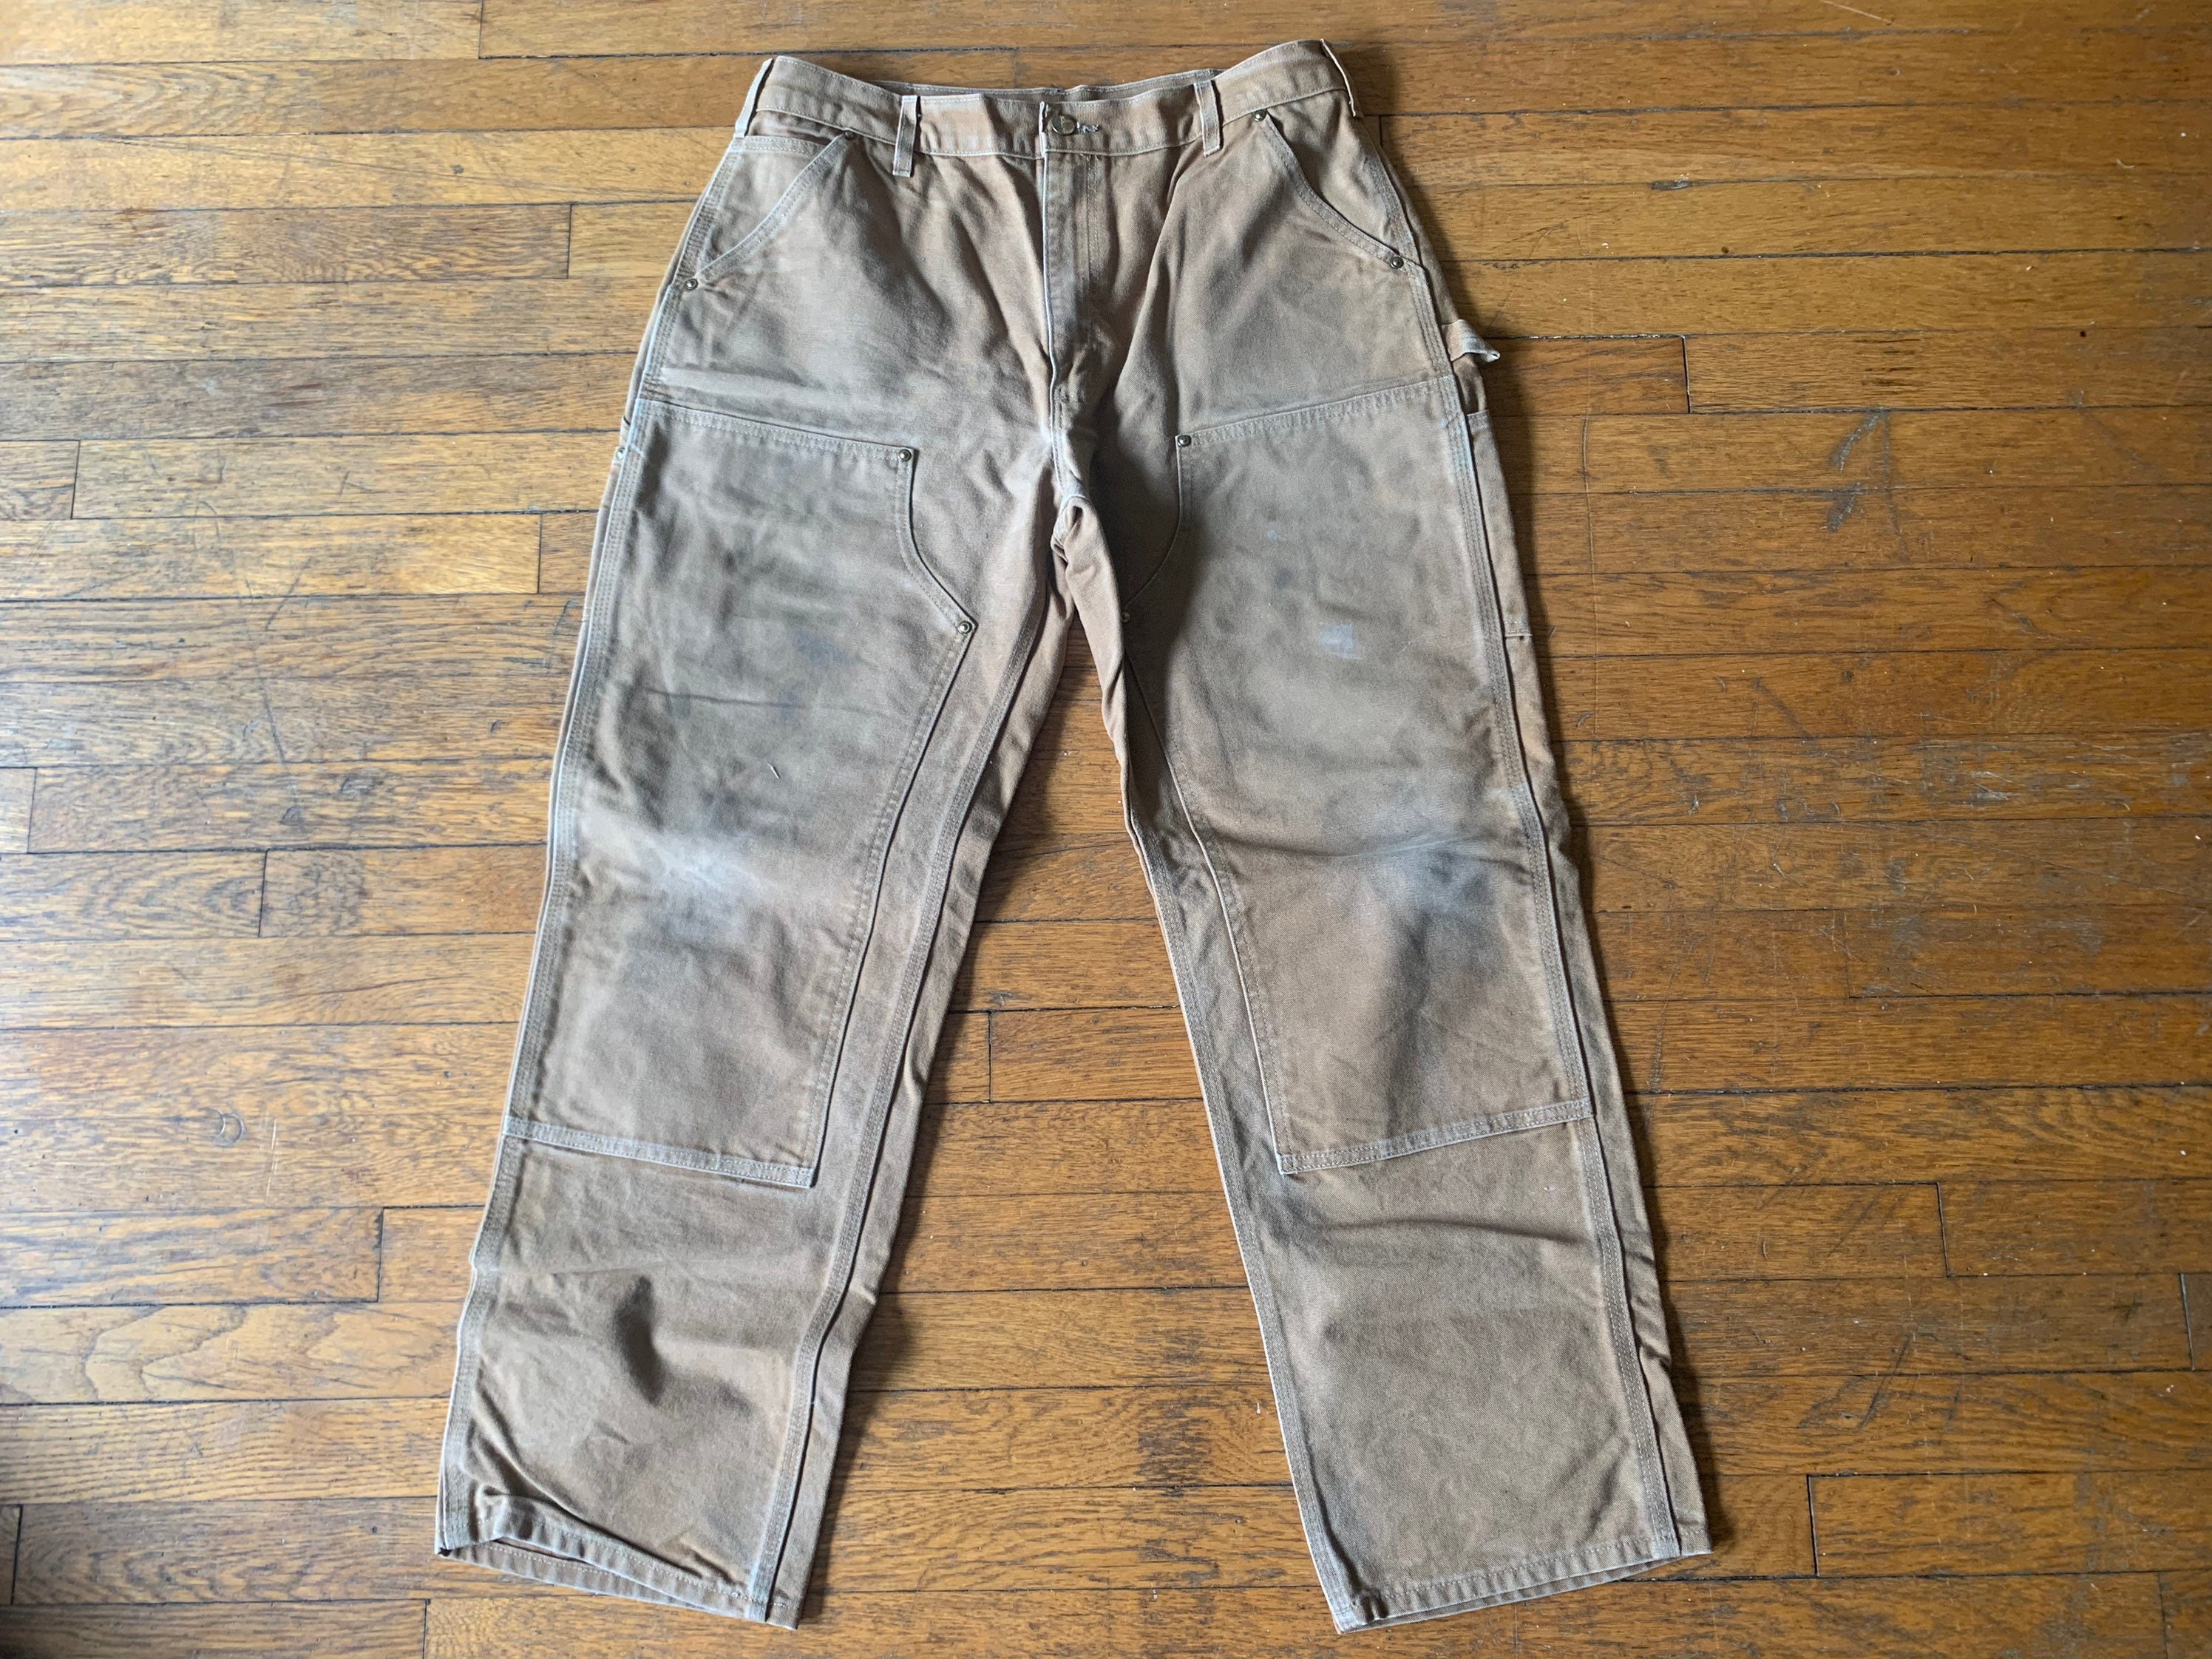 Lot 873 Duck Canvas 1873 1st Copper Riveted Work Pants | Bronson Ginger / W34